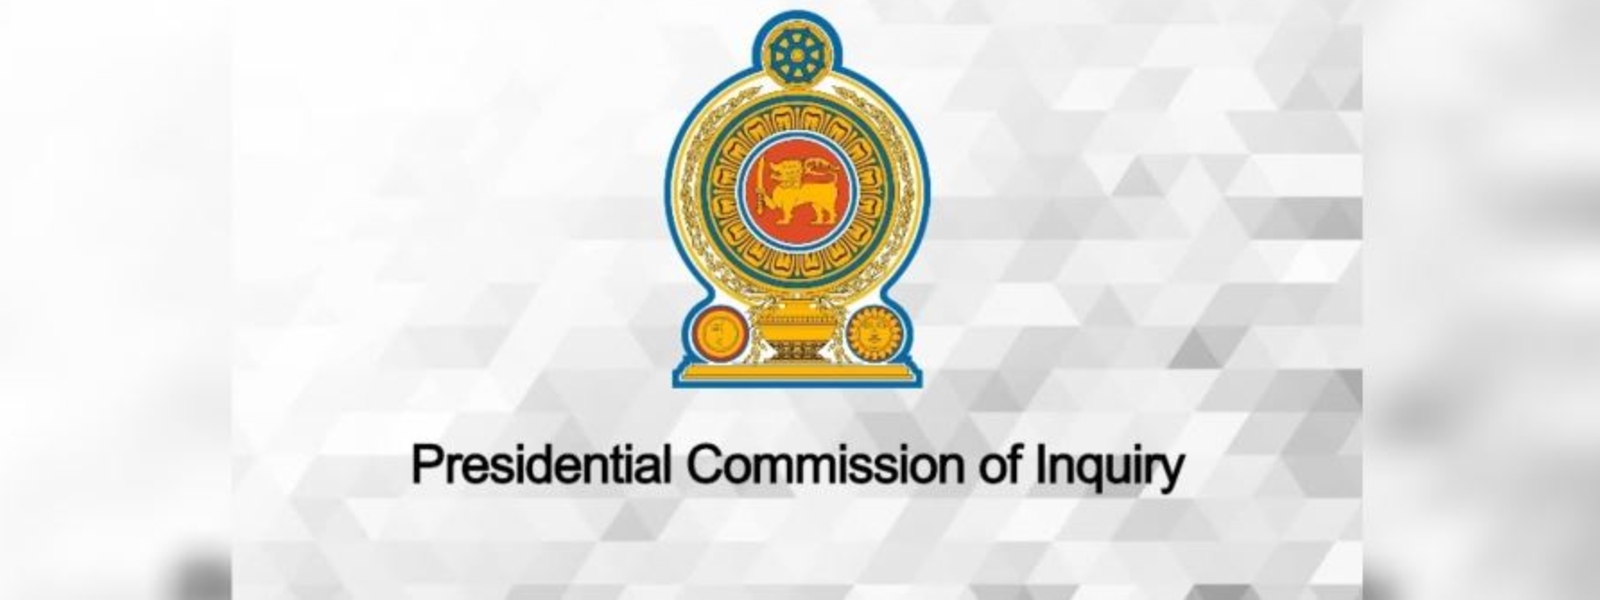 Major General (Retd.) Kapila Hendawitharana and DIG Nalaka De Silva to provide evidence at Presidential Commission appointed to look into the April 21st attacks